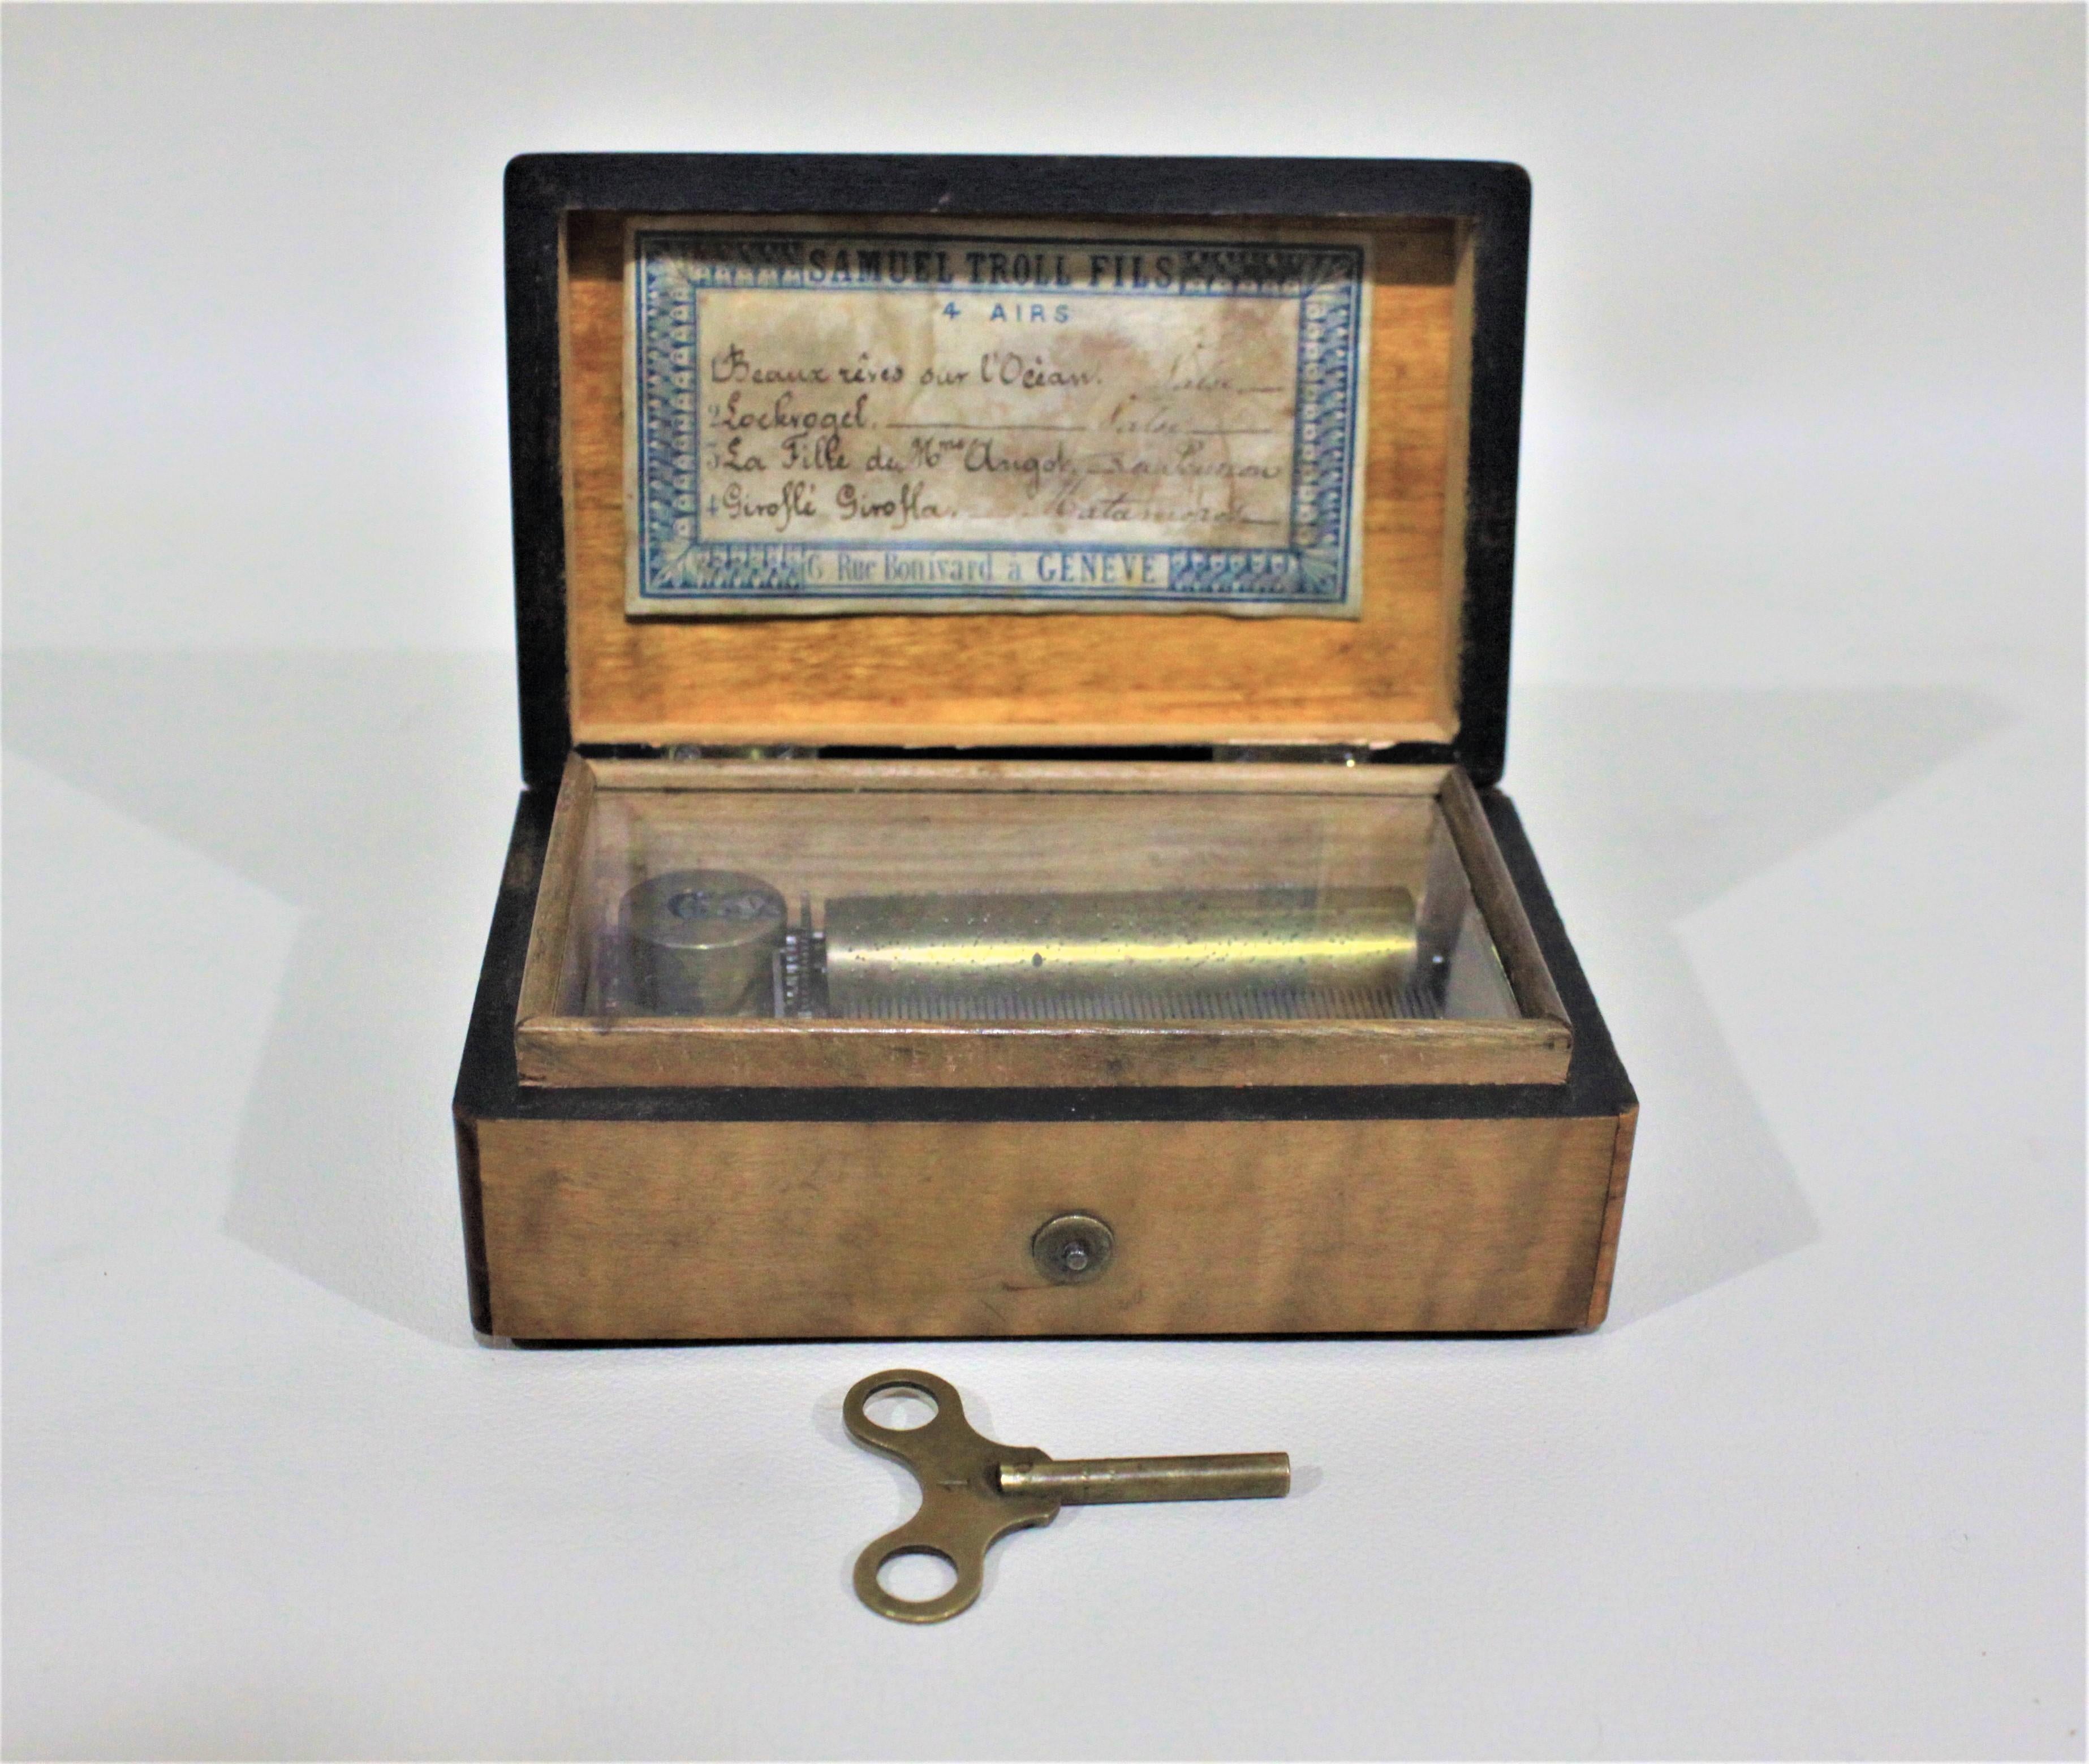 Made in Switzerland in approximately 1850, this key wind brass cylinder music box is set in a burled walnut case with an inlaid shield in the top and has a glass protective cover over the mechanism. On the inside of the lid is the original label and